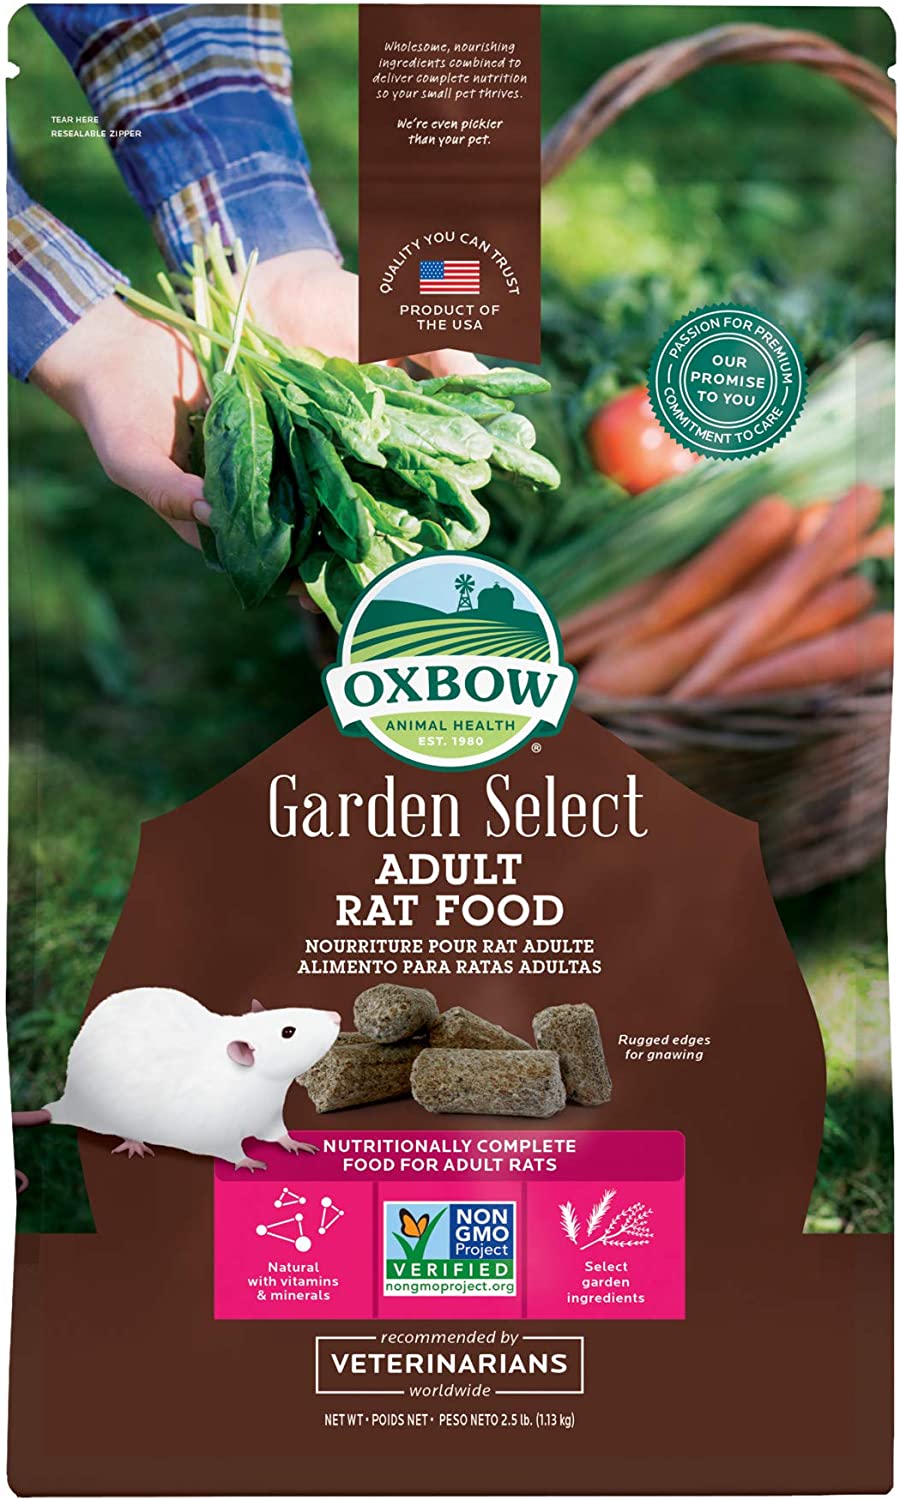 Rat Food by Oxbow - Garden Select